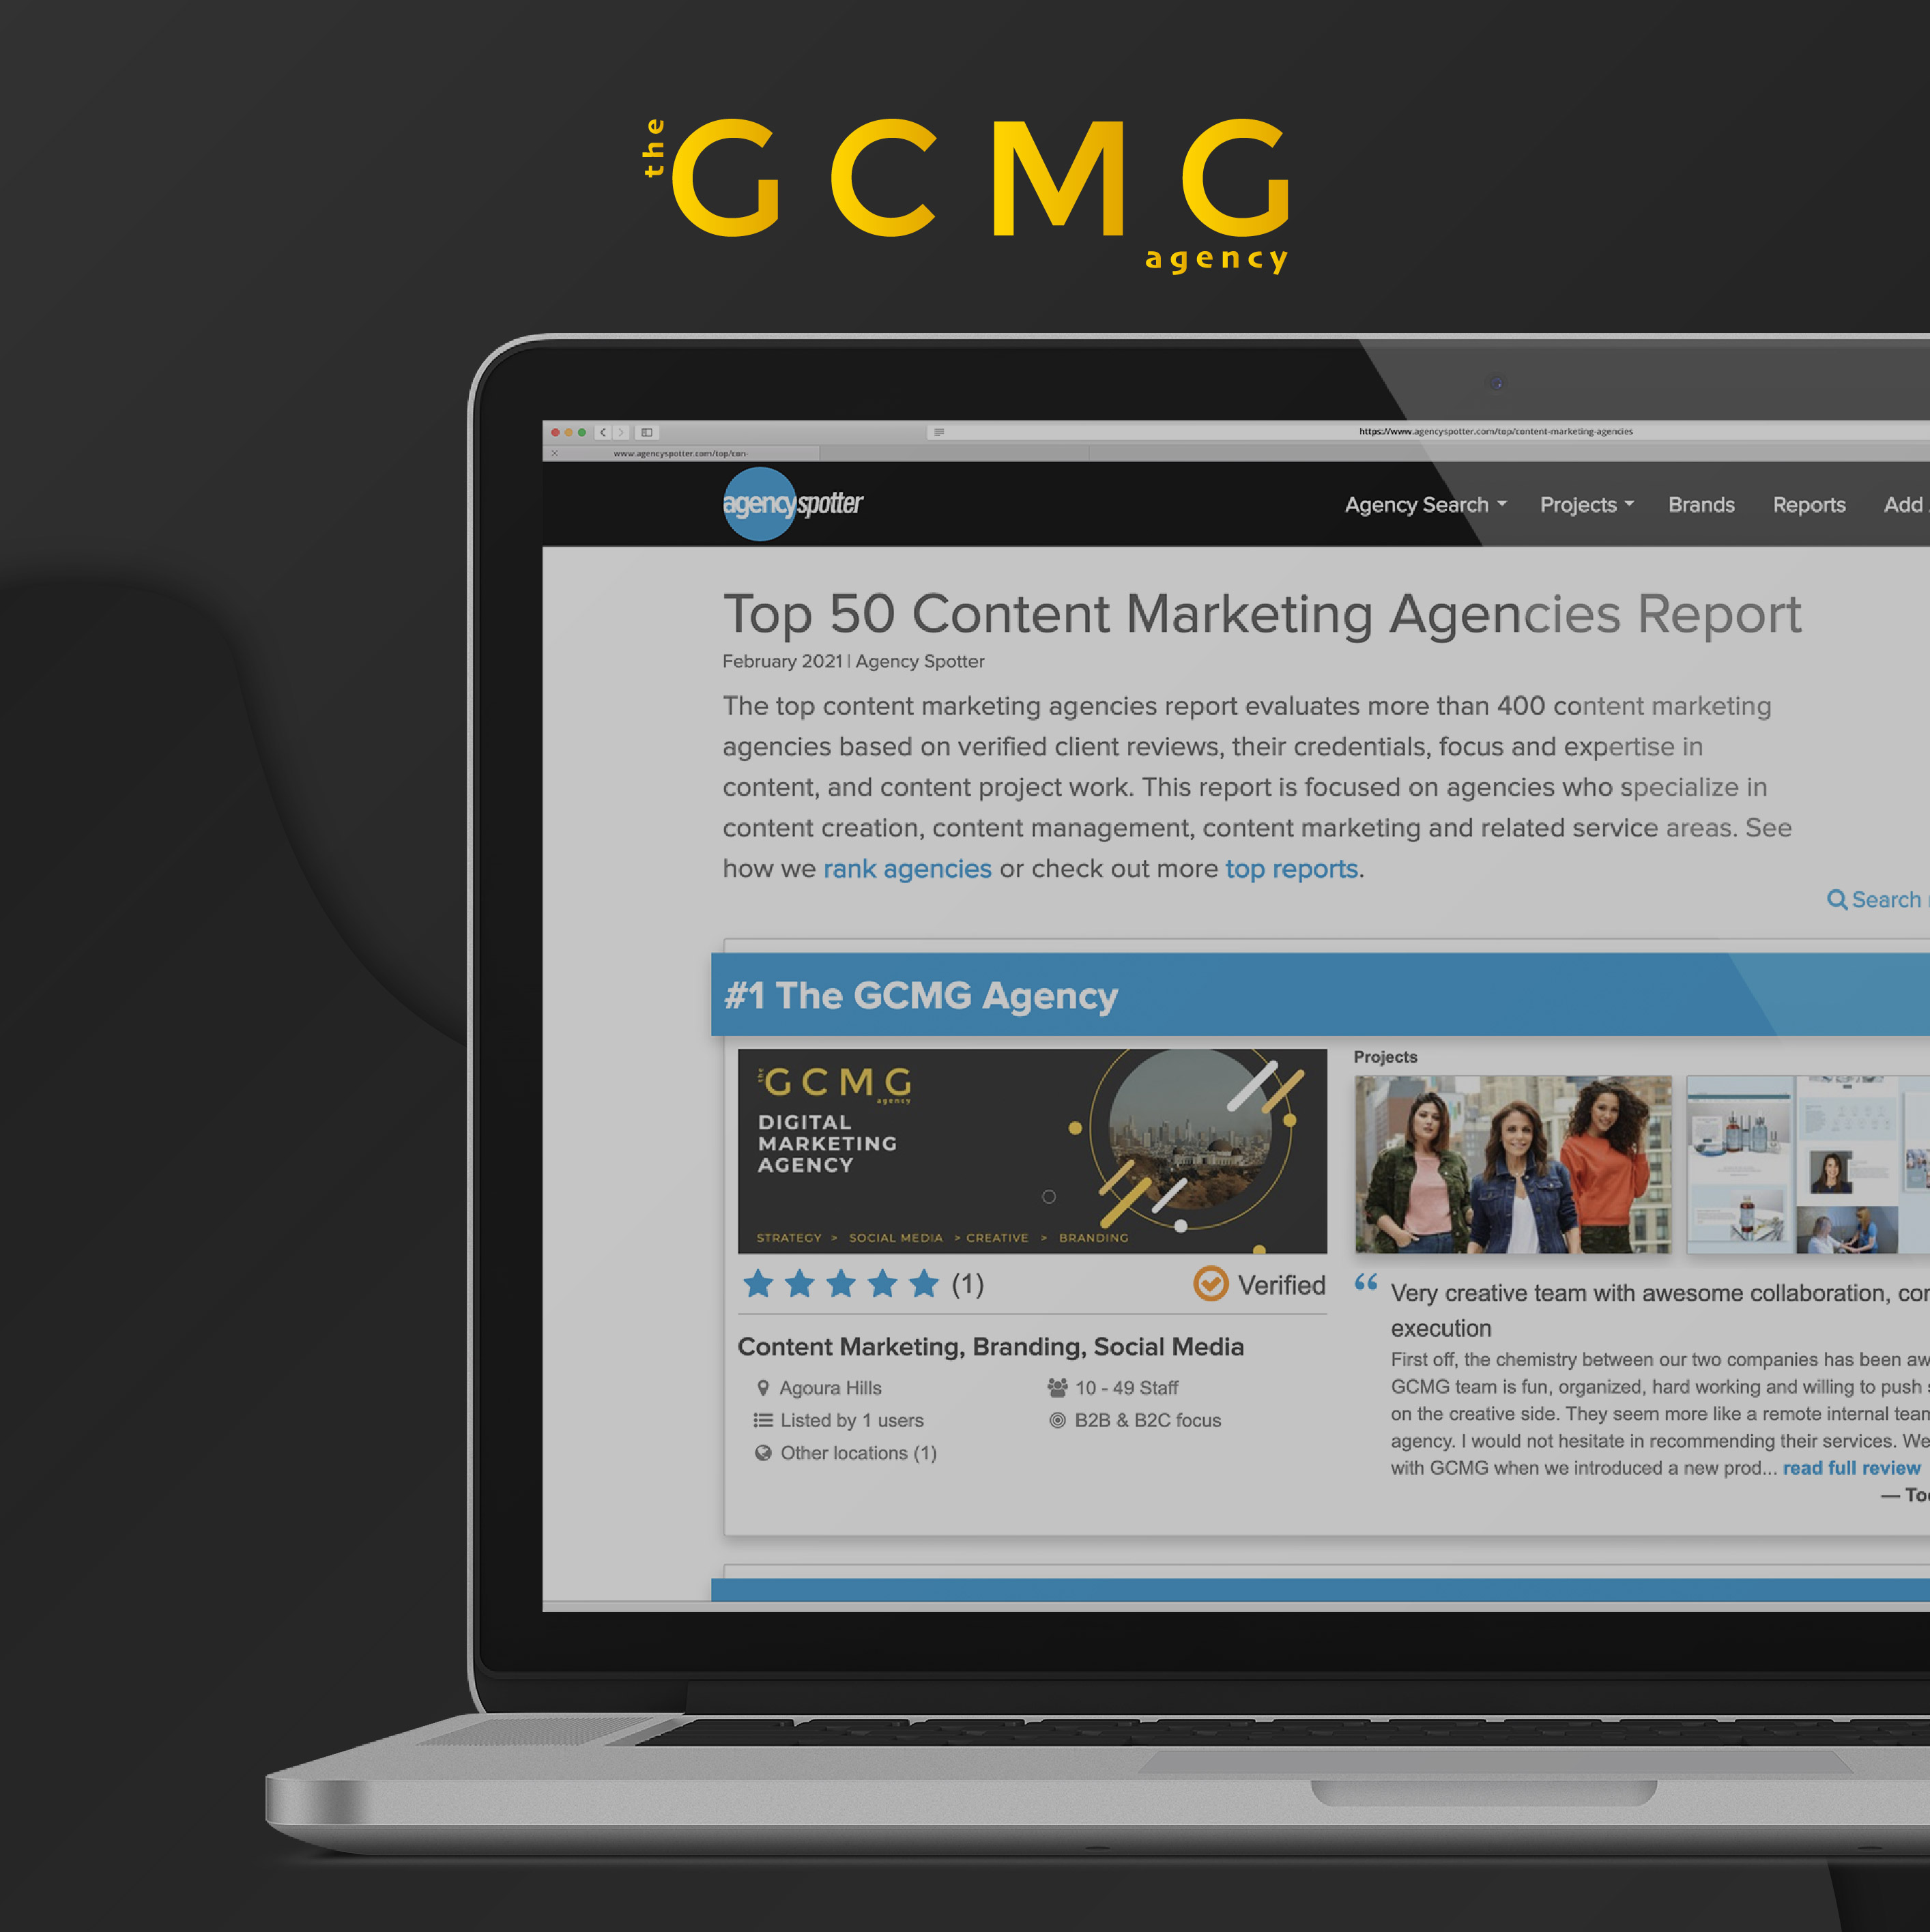 THE GCMG AGENCY NAMED AS NO. 1 CONTENT MARKETING AGENCY 